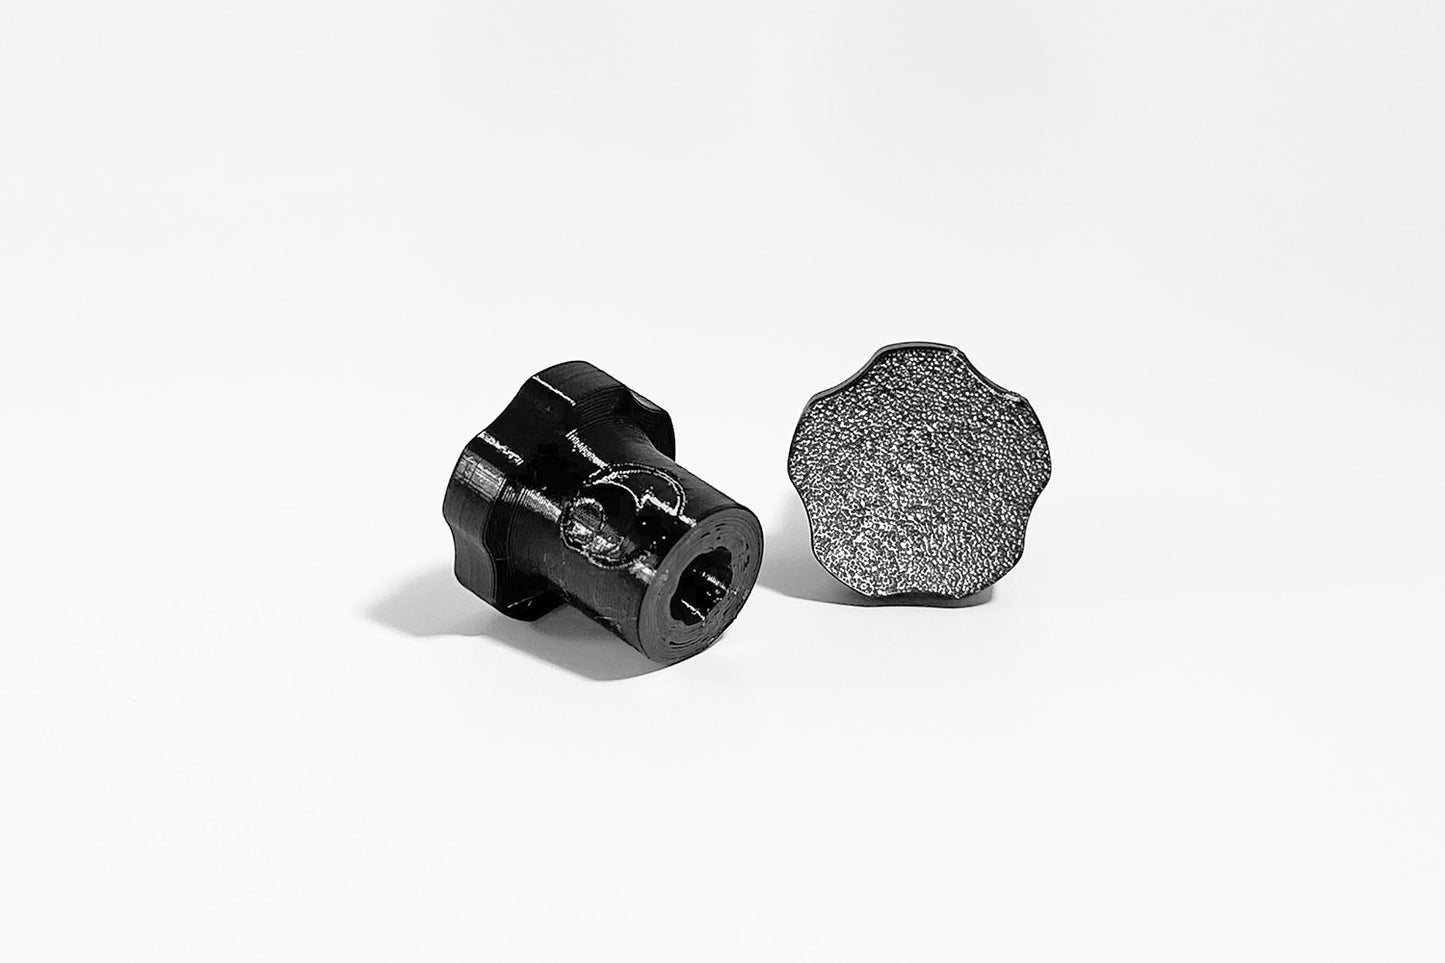 Sold in pair, our 3D printed Brake Caliper Bolt Holders are compatible with all M5 and M6 caliper bolts.